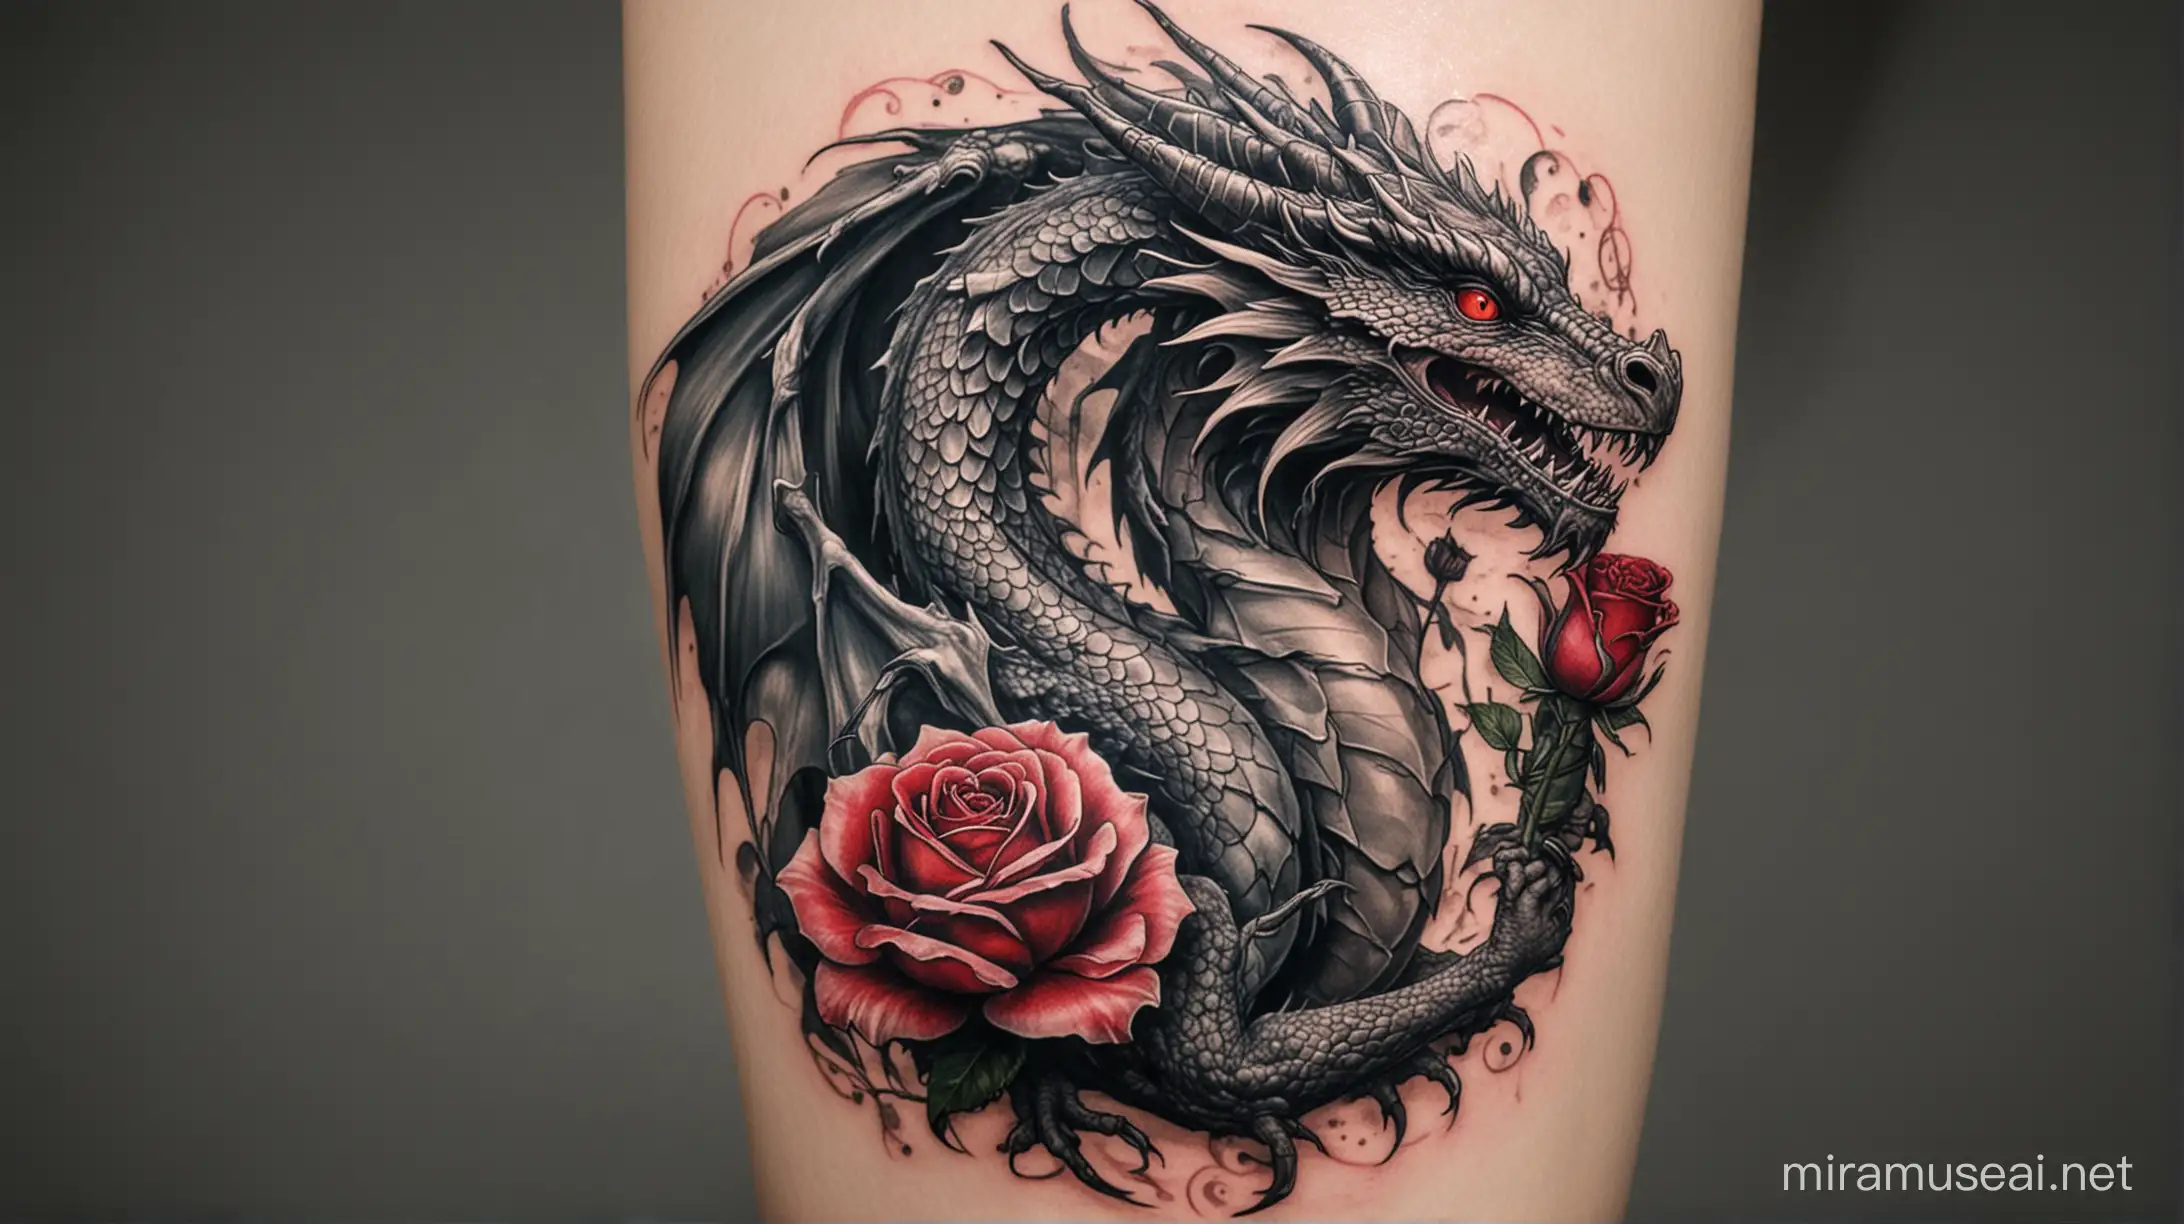 Dragon Tattoo Holding a Rose Intricate Inkwork Combining Mythical and Natural Elements